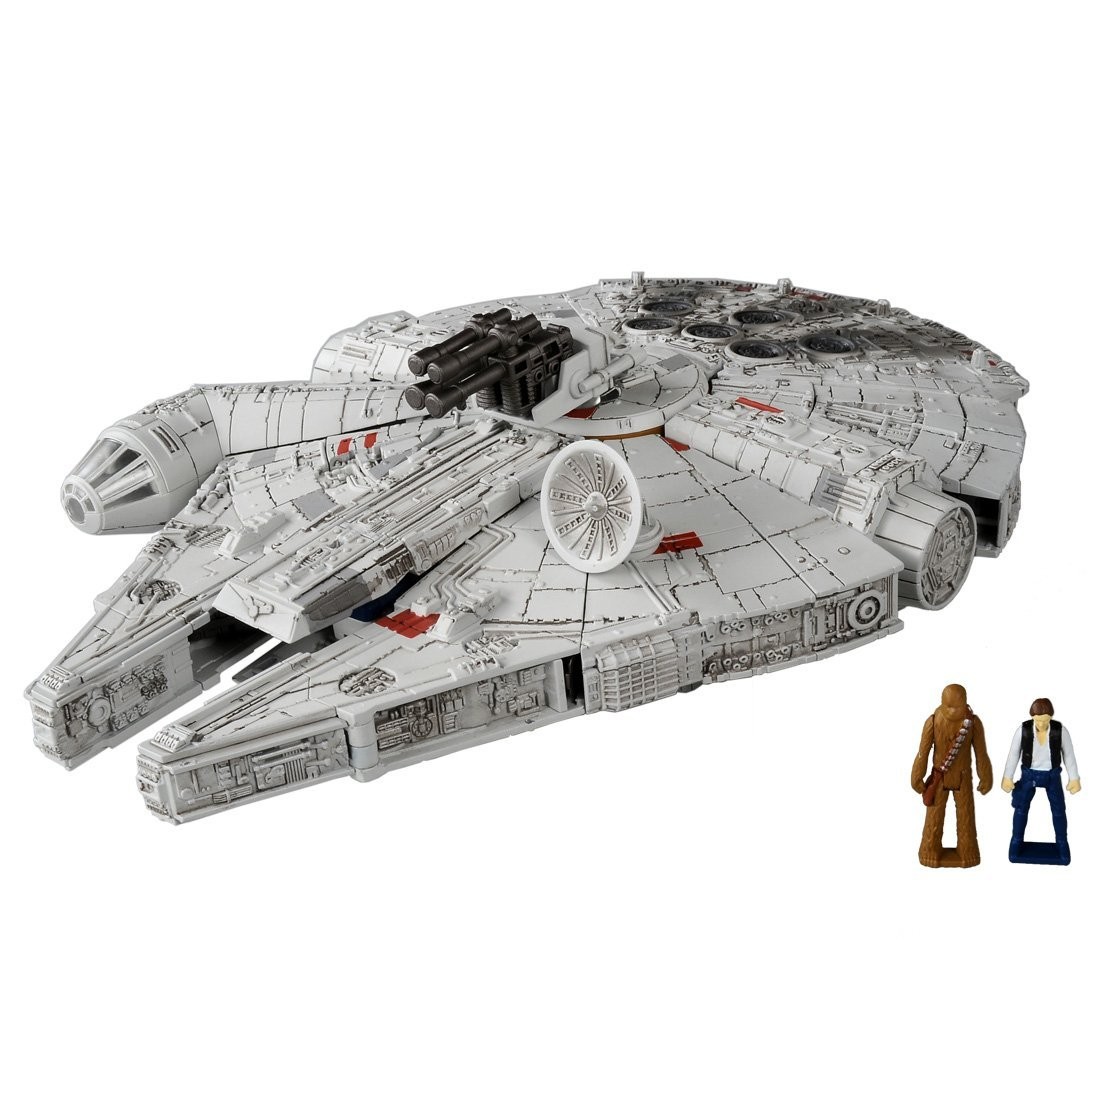 Transformers News: More Images of Takara Star Wars Powered By Transformers 02 Millennium Falcon